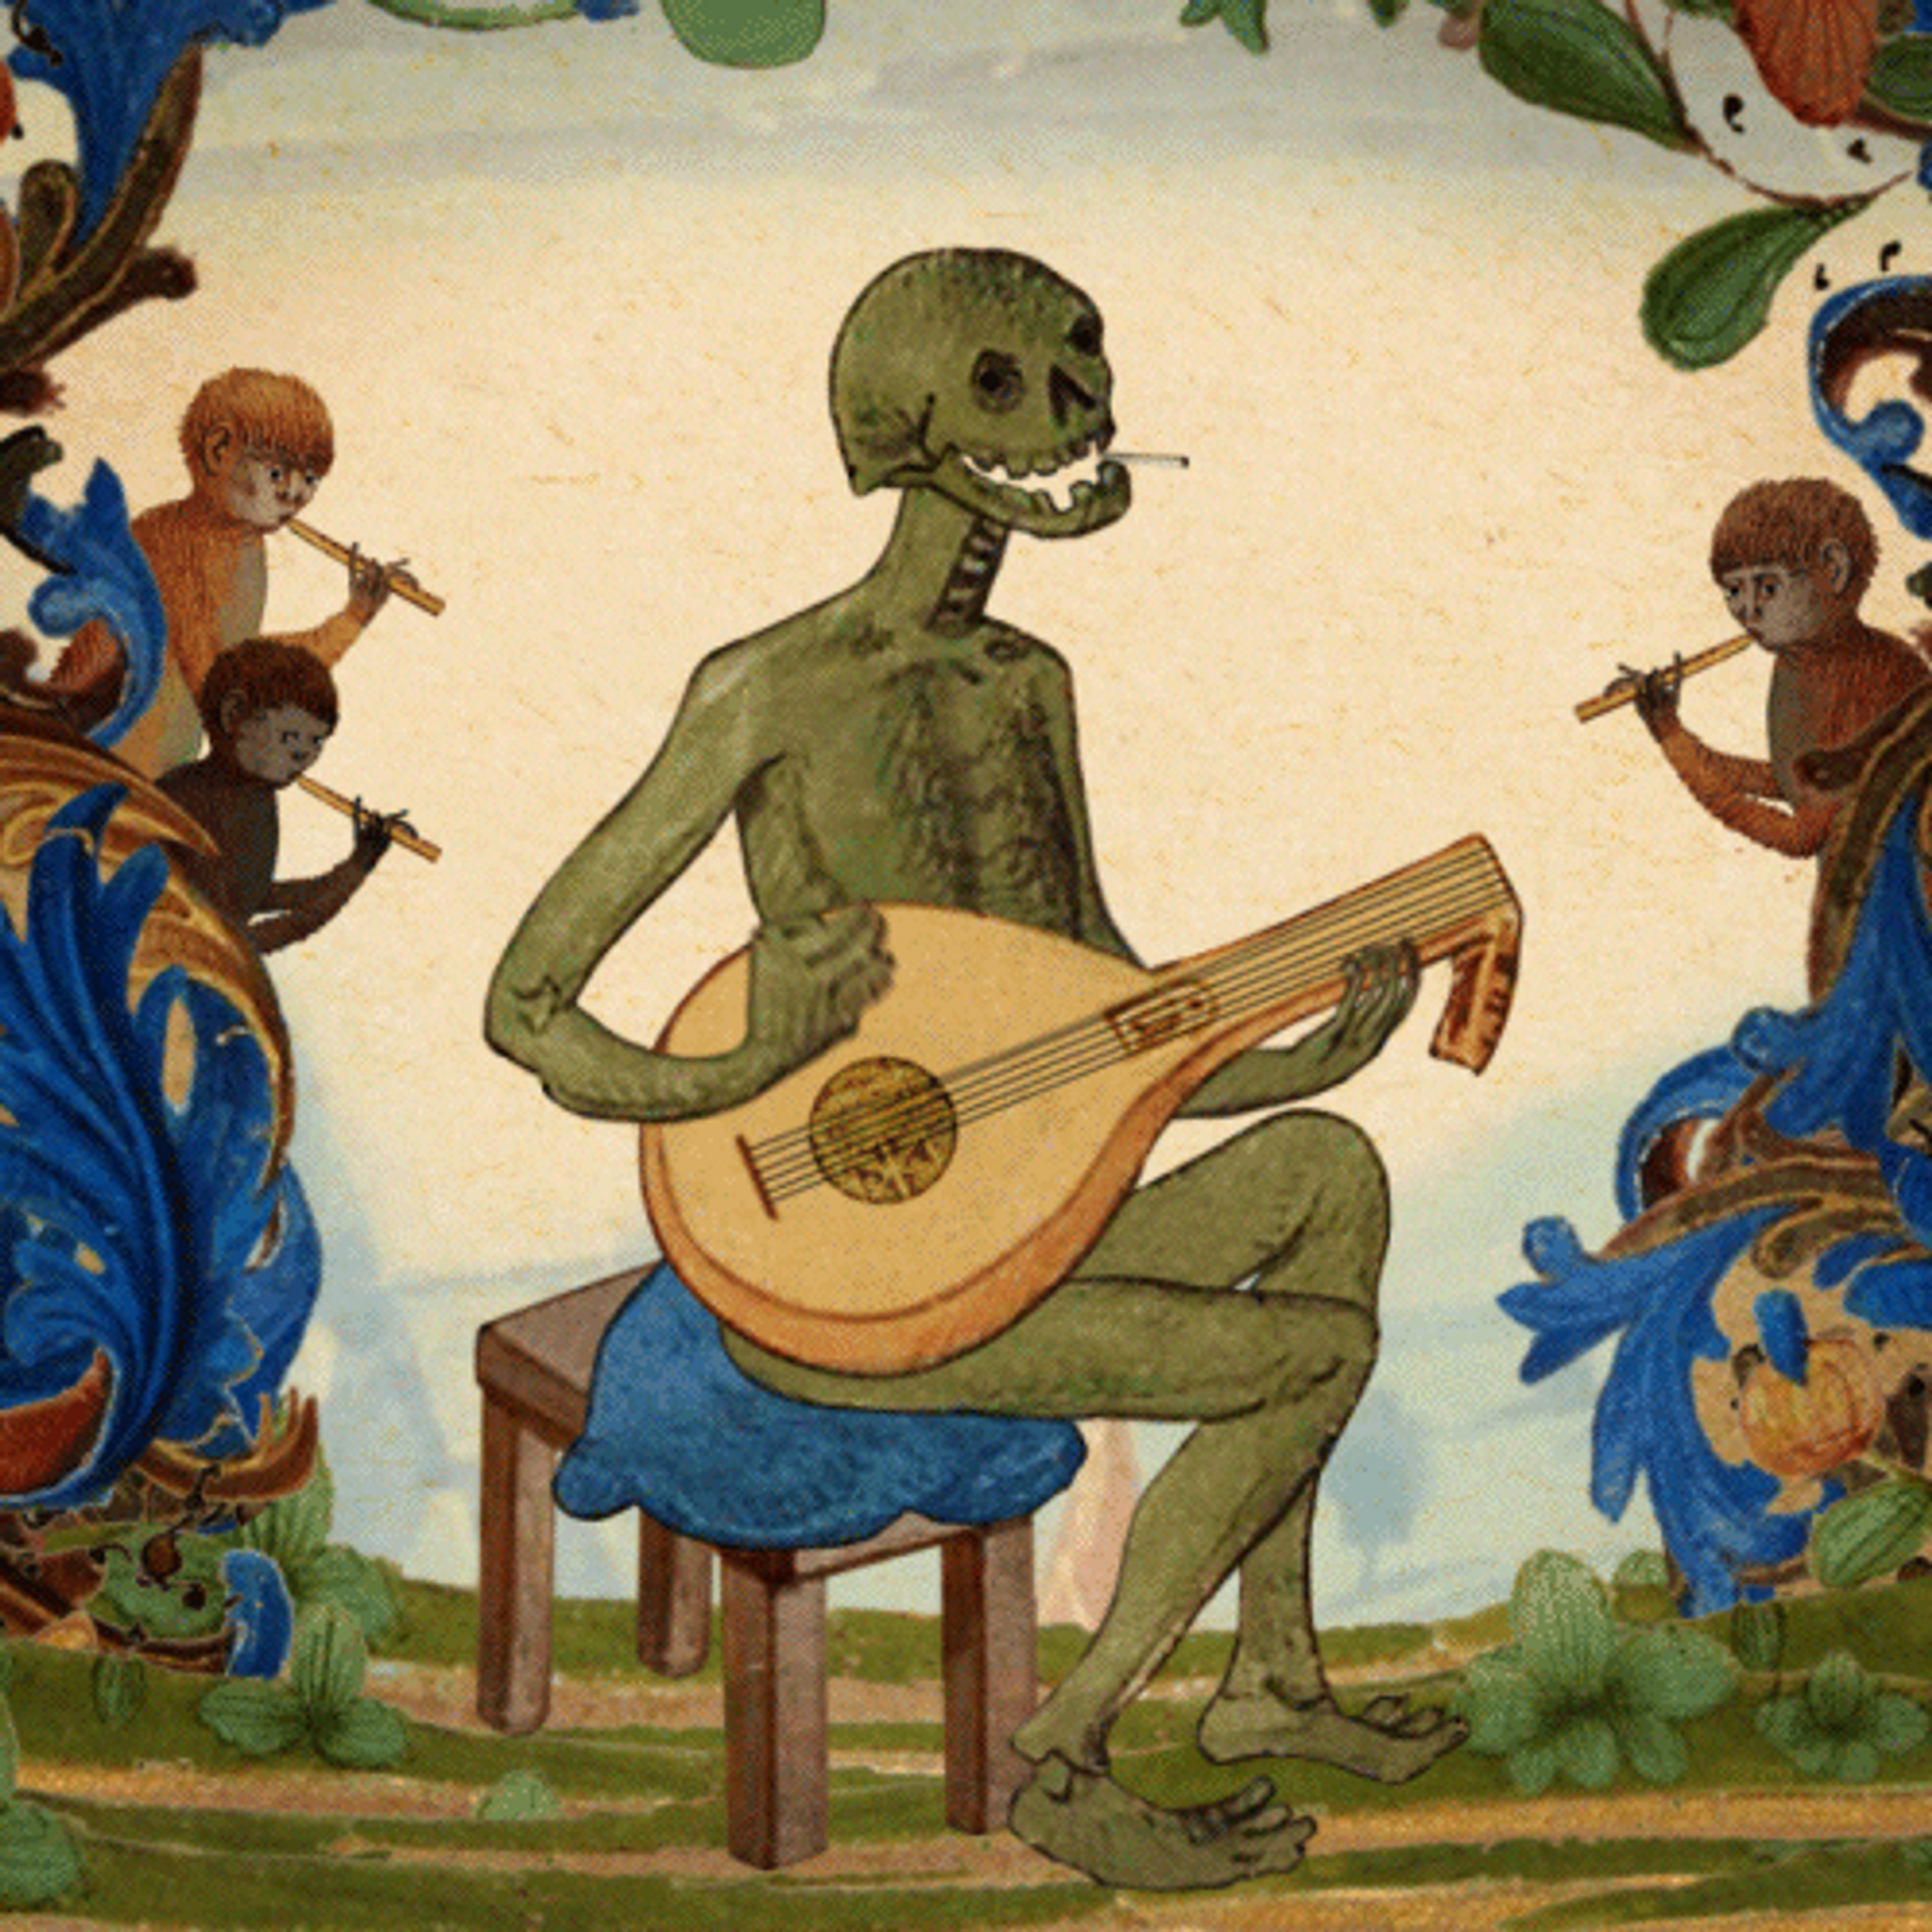 An animated medieval drawing of death playing a banjo